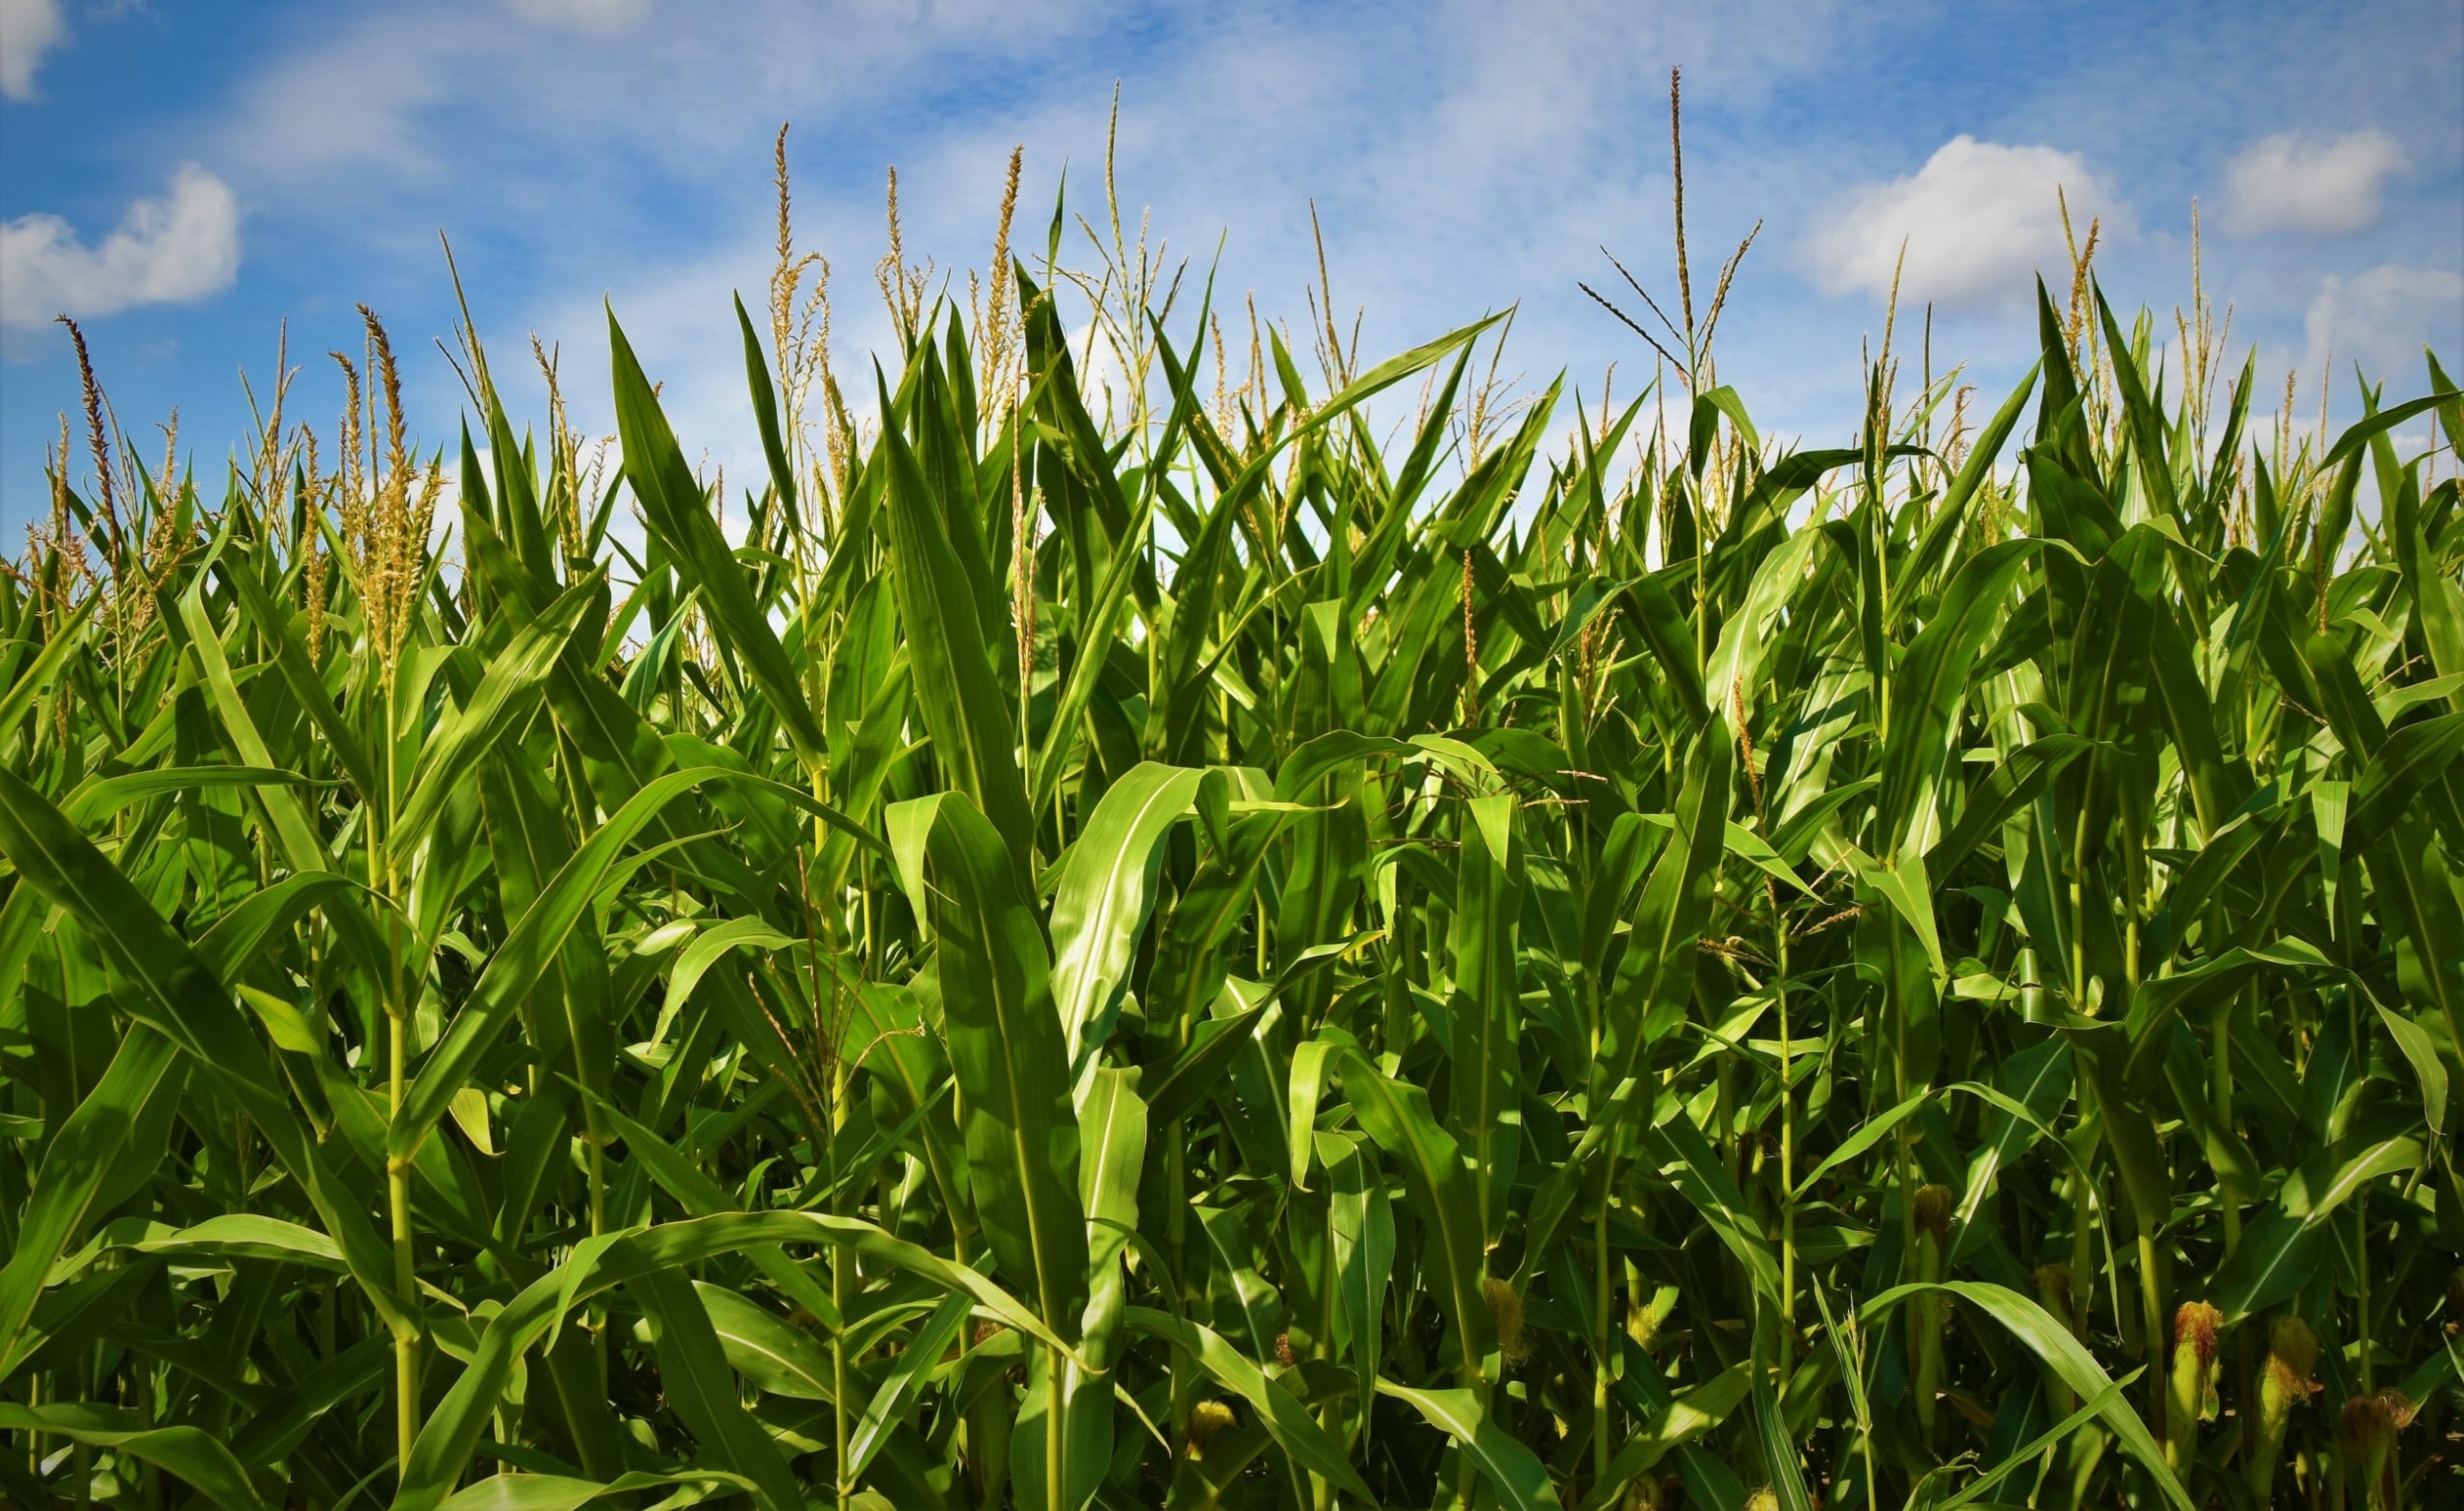 Close up photo of green cornstalks growing in a field with blue sky and white clouds above.